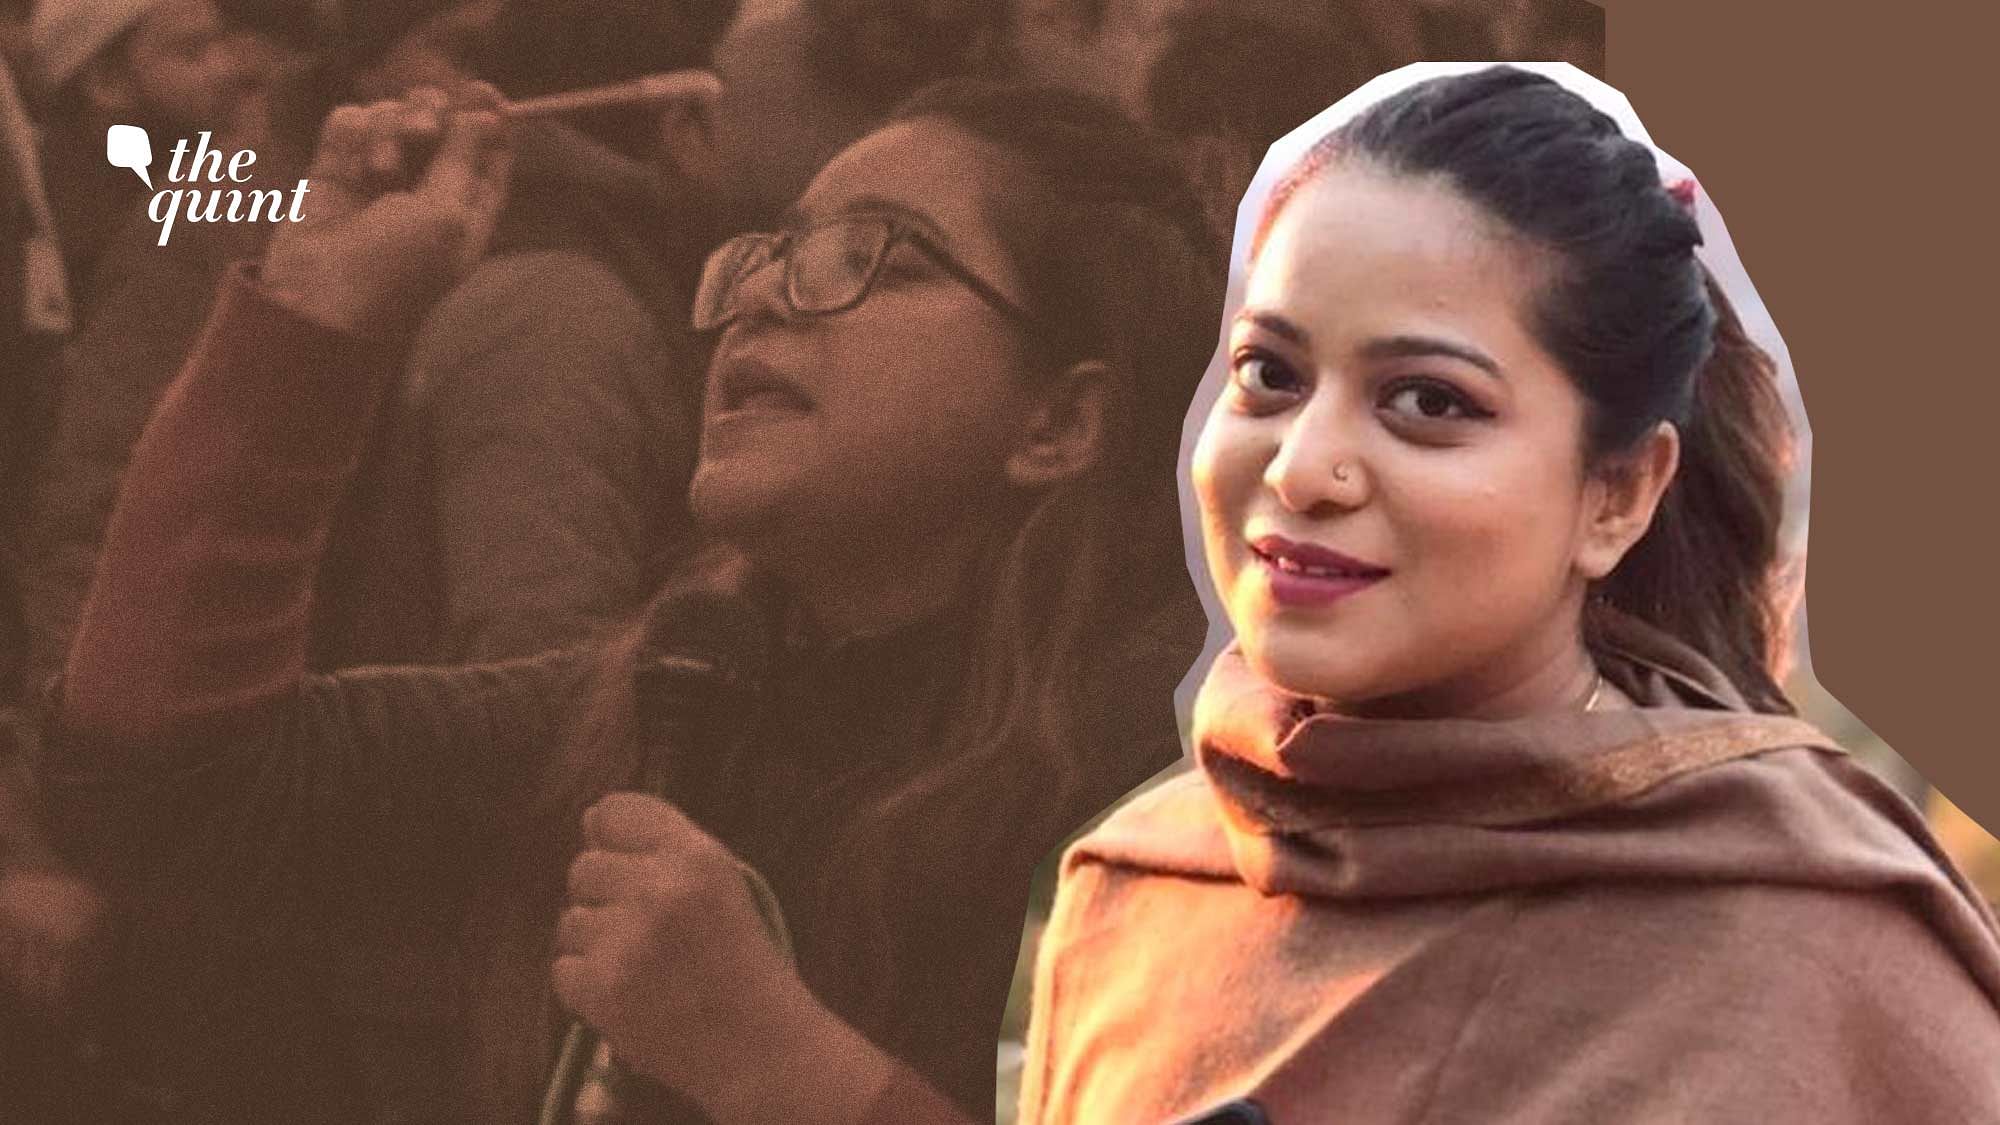 On 10 April 2020, Safoora was arrested in connection with the anti-CAA protests while she was three-months pregnant.